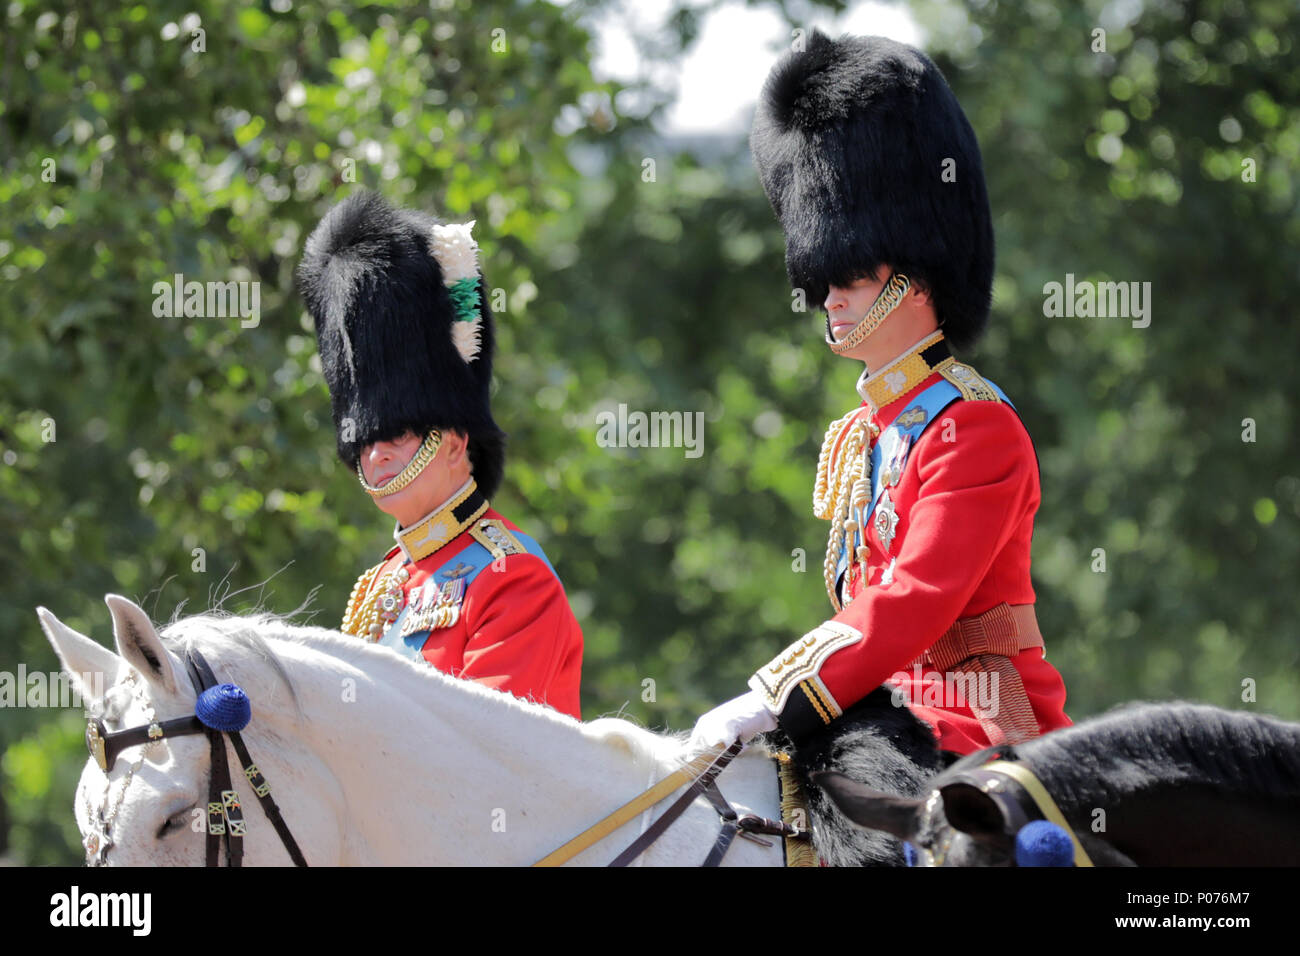 London, UK, 9 June 2018.  HRH Prince William, the Duke of Cambridge, on his horse, Wellesey, Trooping the Colour Credit: amanda rose/Alamy Live News Credit: amanda rose/Alamy Live News Stock Photo